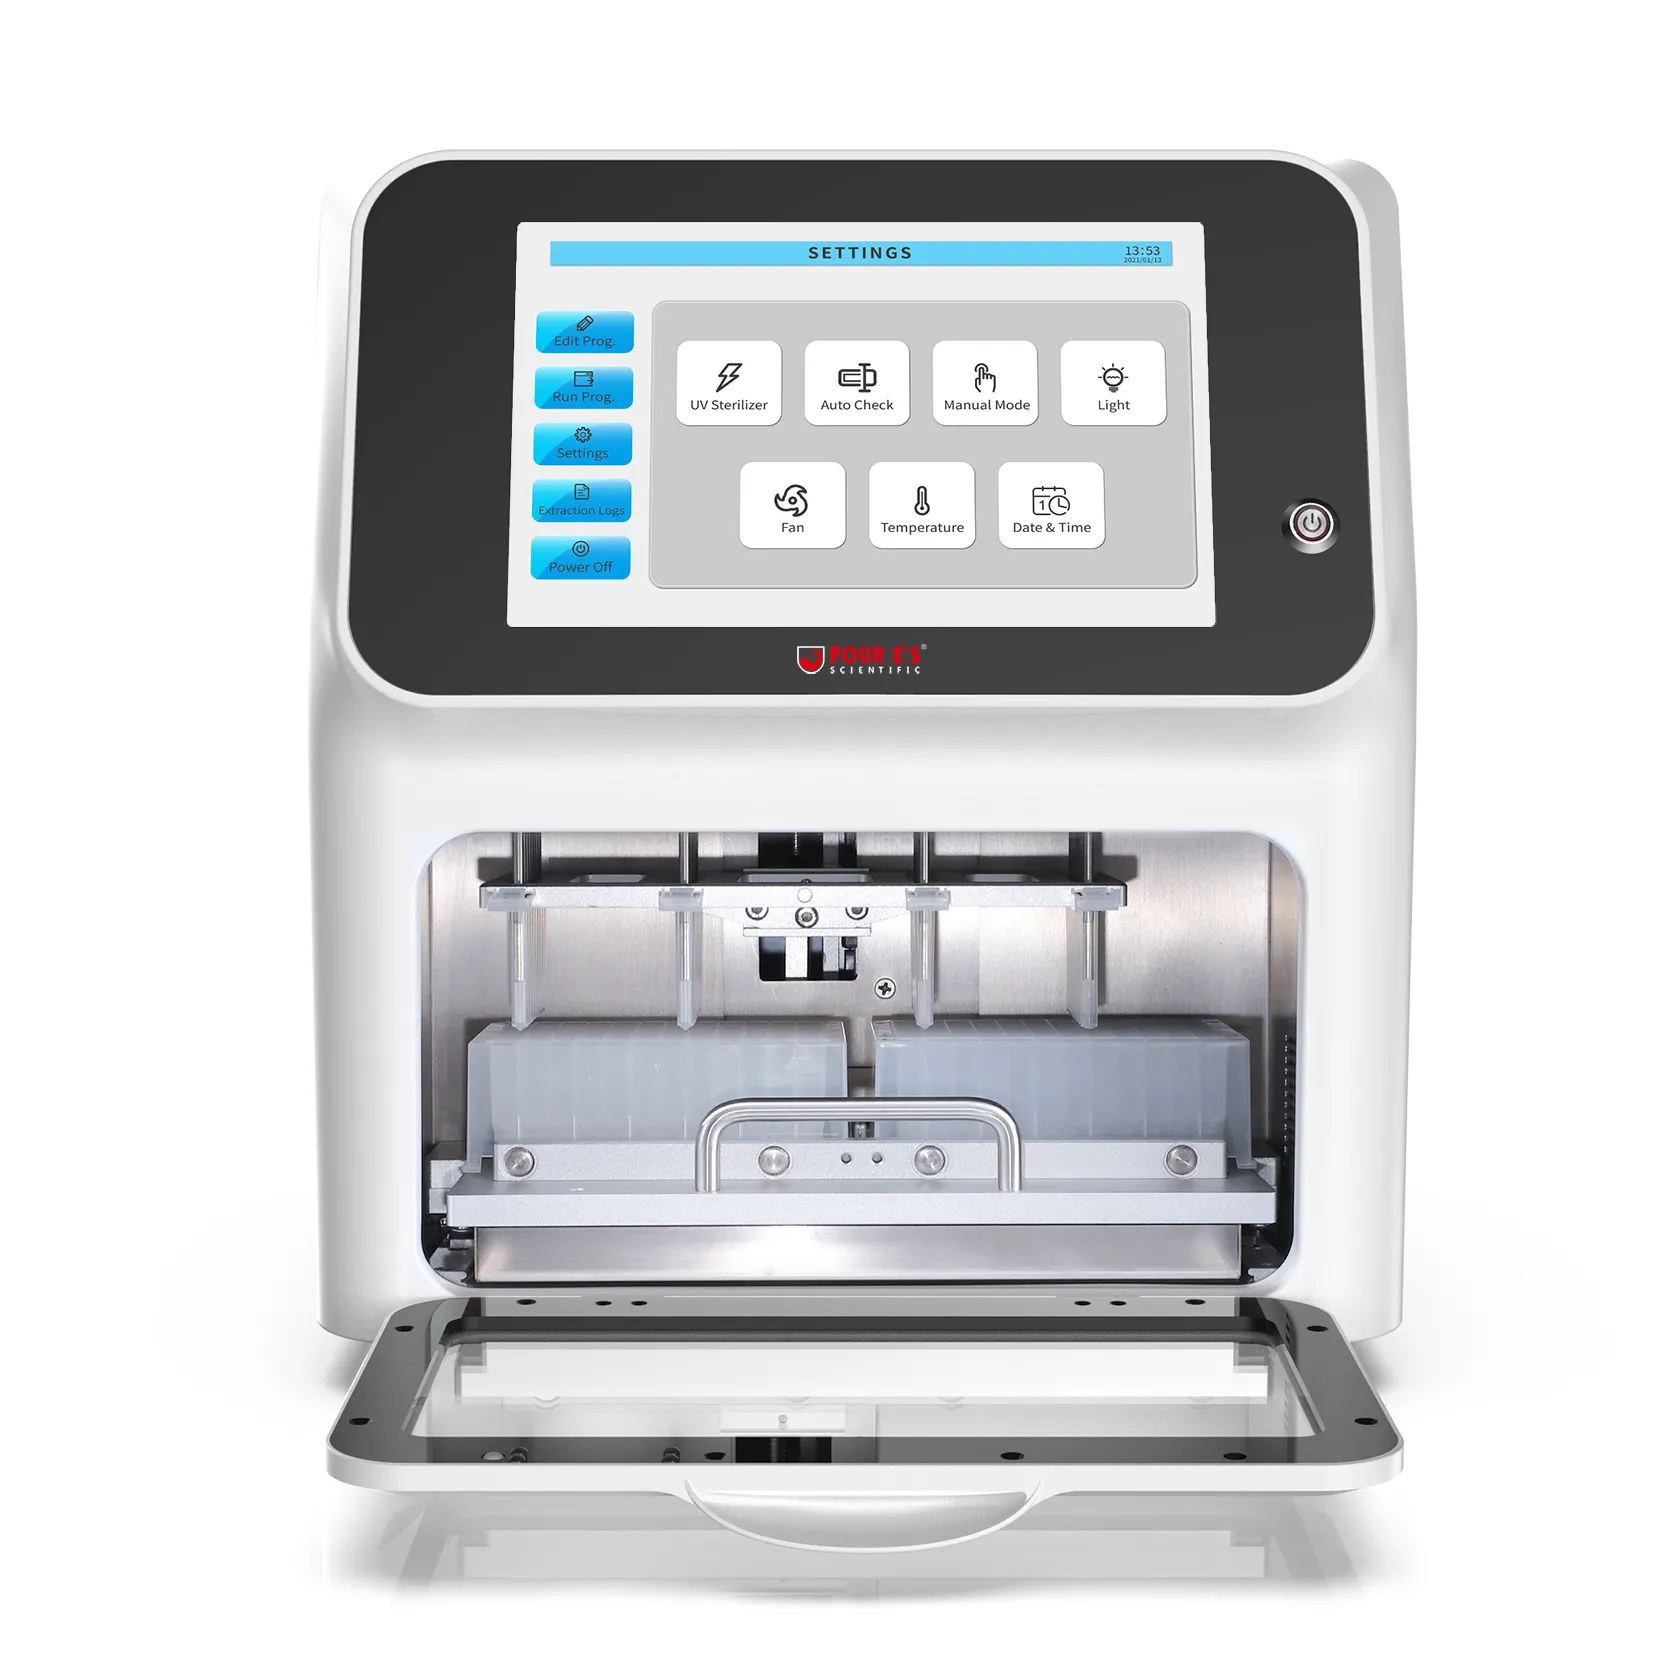 Automated Nucleic Acid Dna Extraction Machine With Magnetic Bead Separation Technology